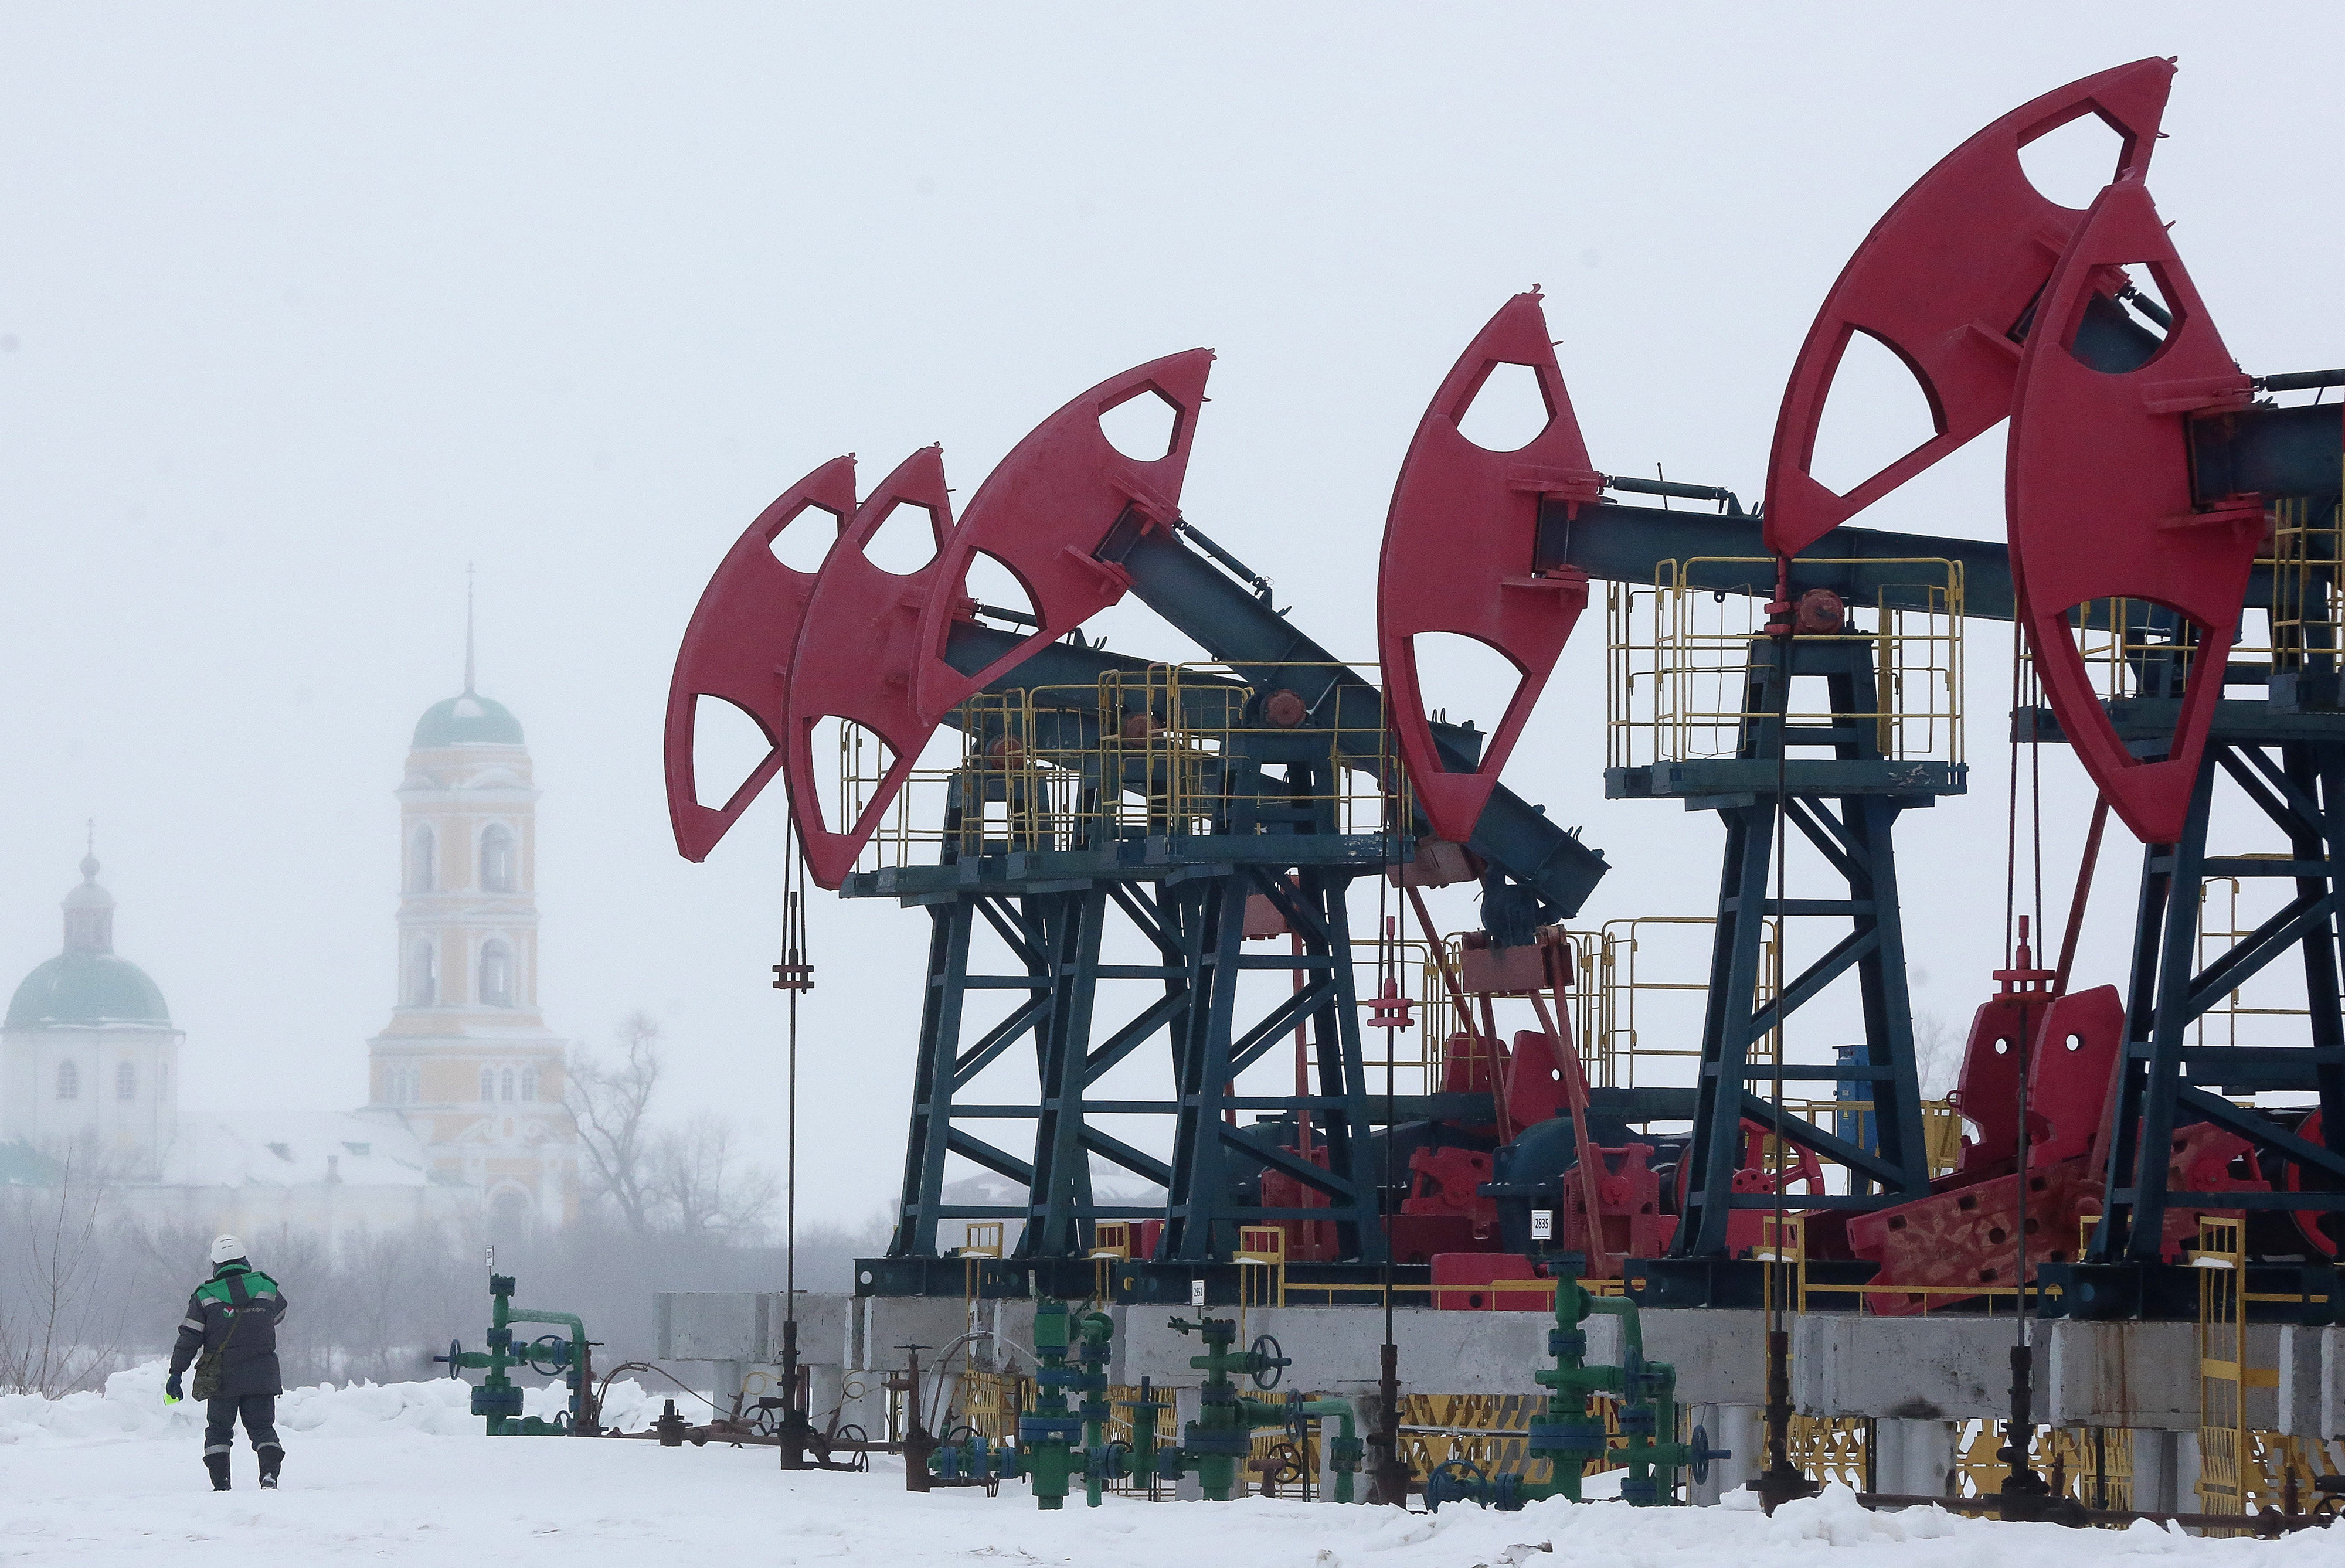 A worker passes a line of oil pumping jacks, also known as nodding donkeys, in the Bashneft PAO oilfield outside the village of Nikolo-Beryozovka near Neftekamsk, Russia, on Thursday, March 3, 2016. Bashneft is an upstream and down stream oil & gas provider which explores, produces and refines its own oil and gas which it extracts from brownfield reserves in the Russian Federation. Photographer: Andrey Rudakov/Bloomberg ORG XMIT: 608301091